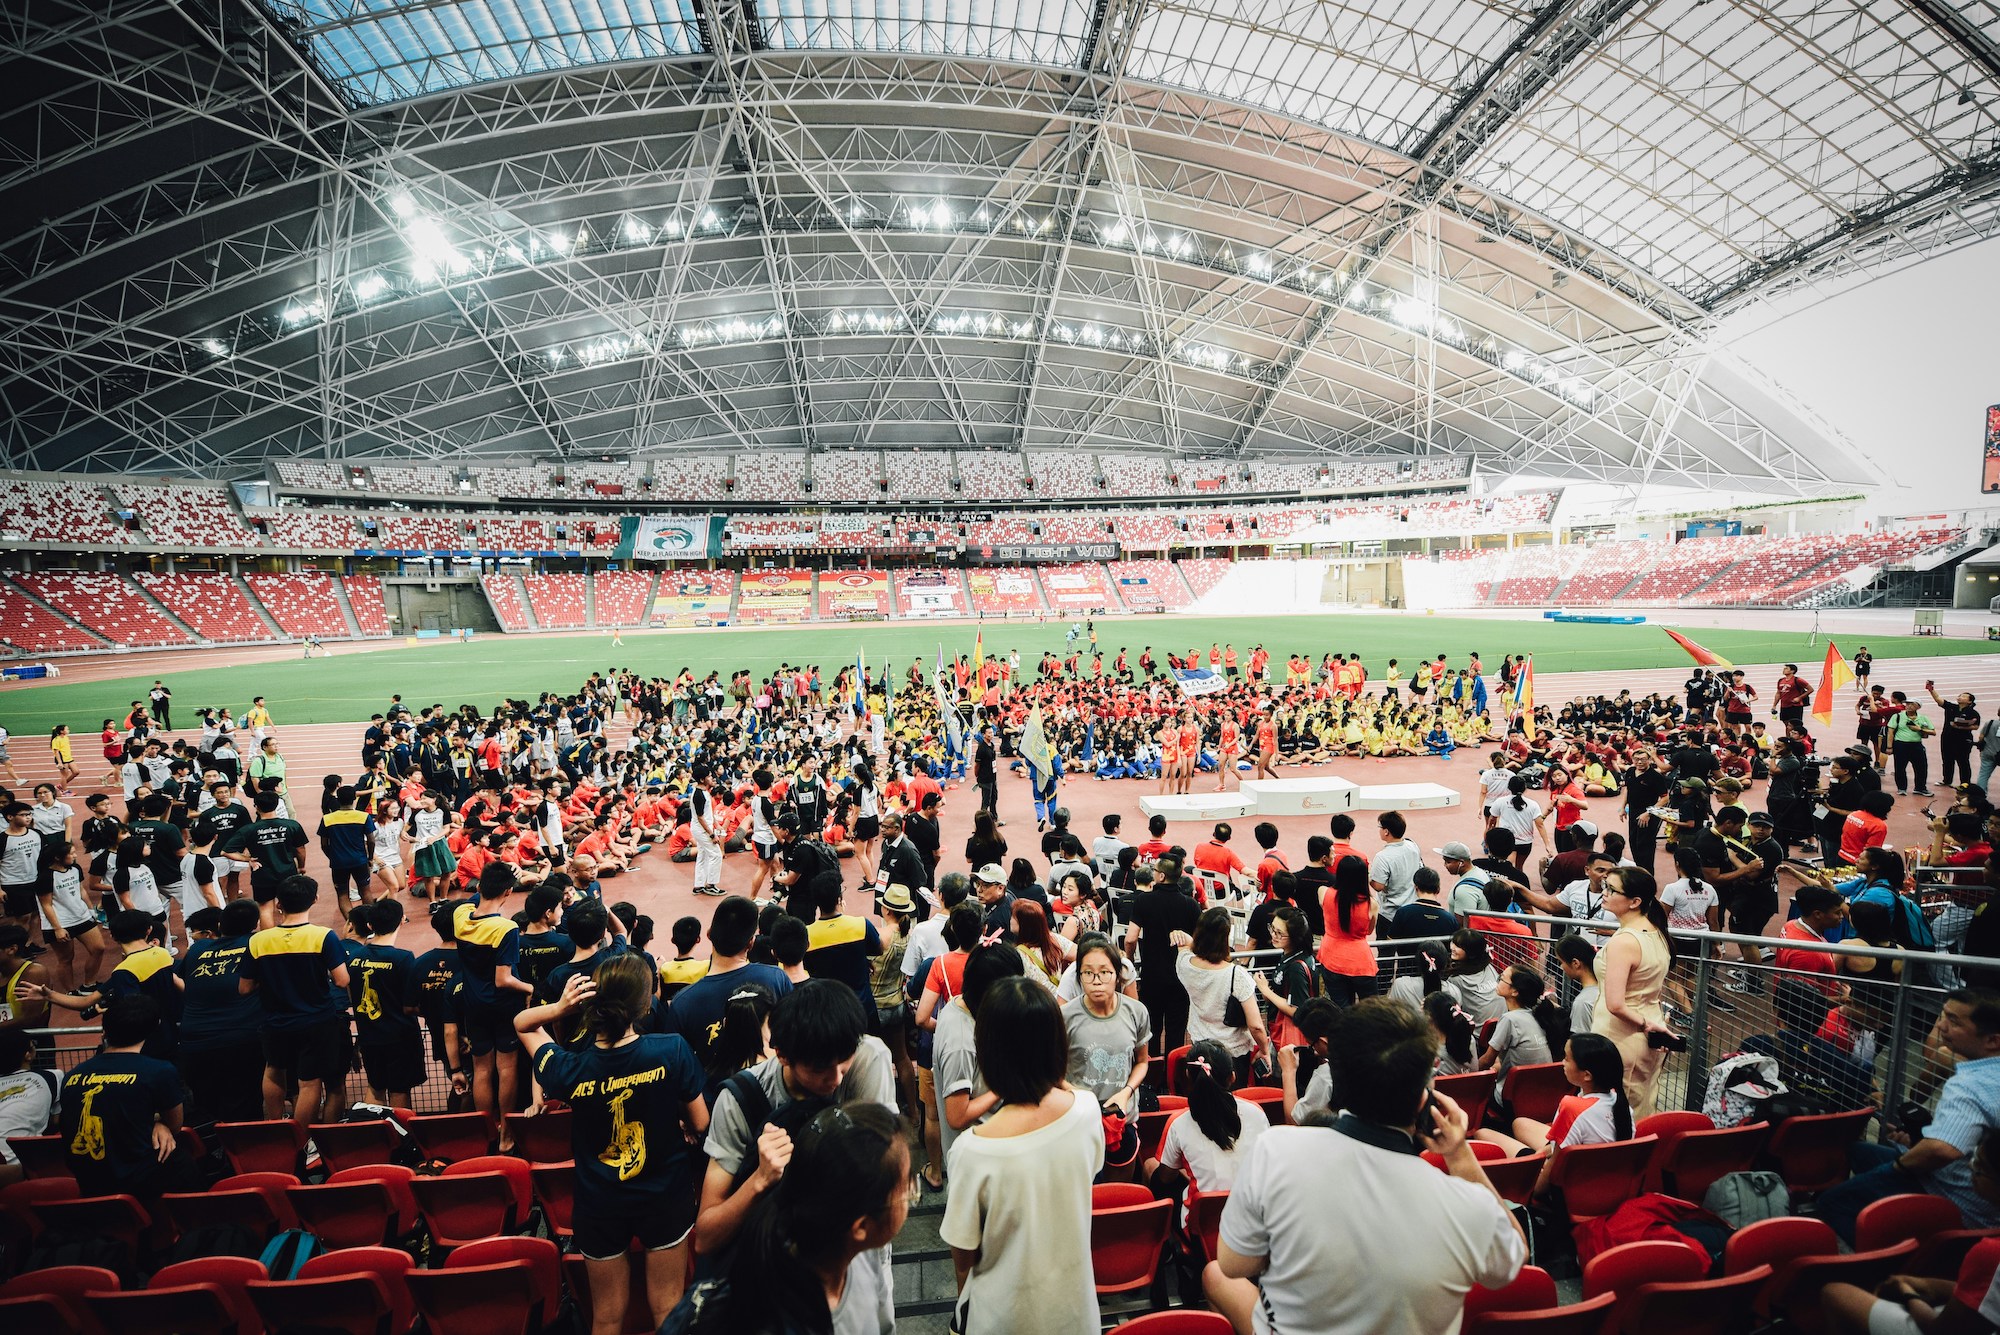 A Rough Guide to Surviving National Stadium for Swifties (and Other Concertgoers)